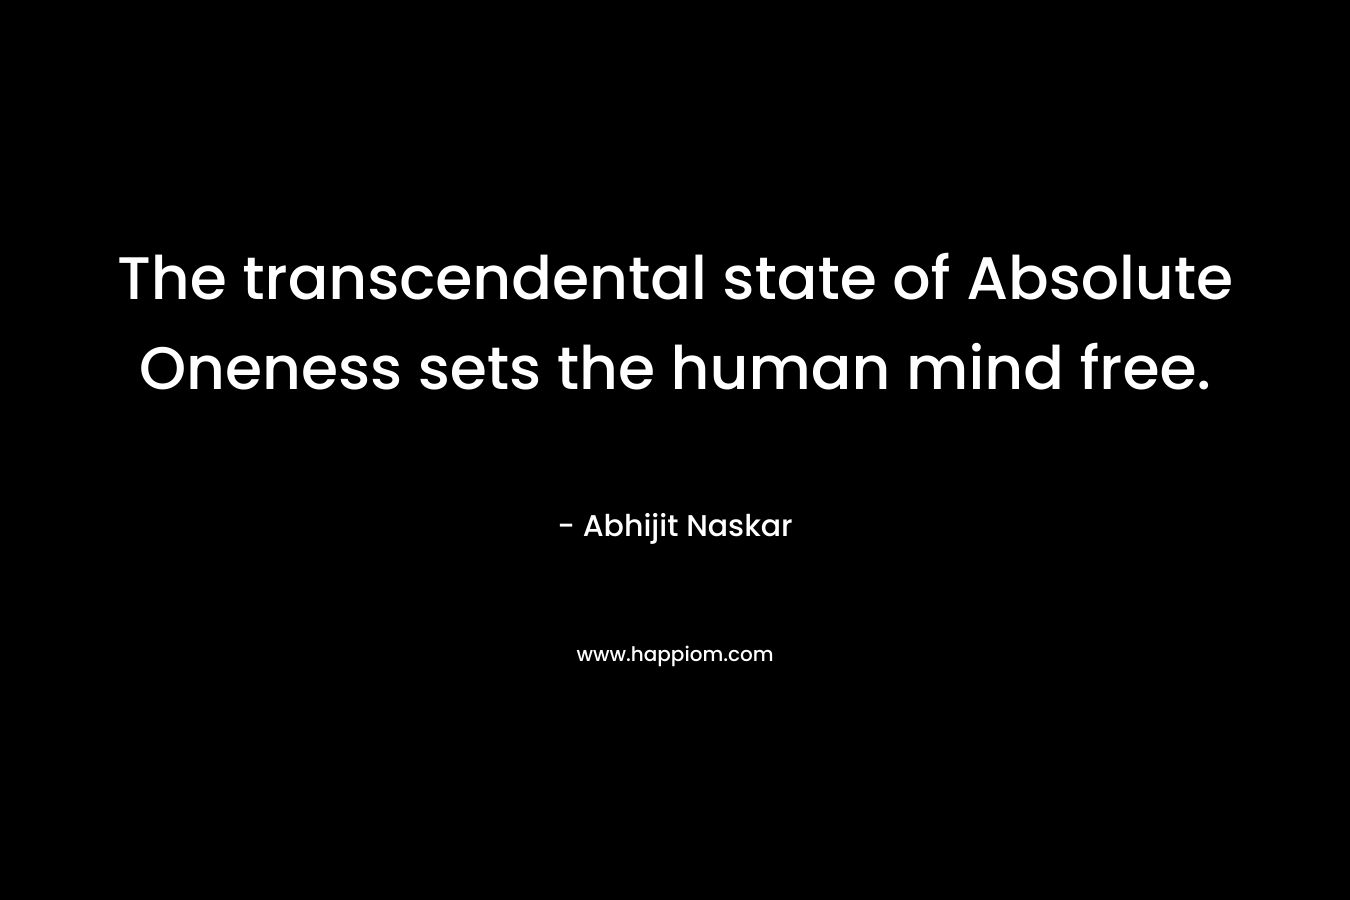 The transcendental state of Absolute Oneness sets the human mind free.